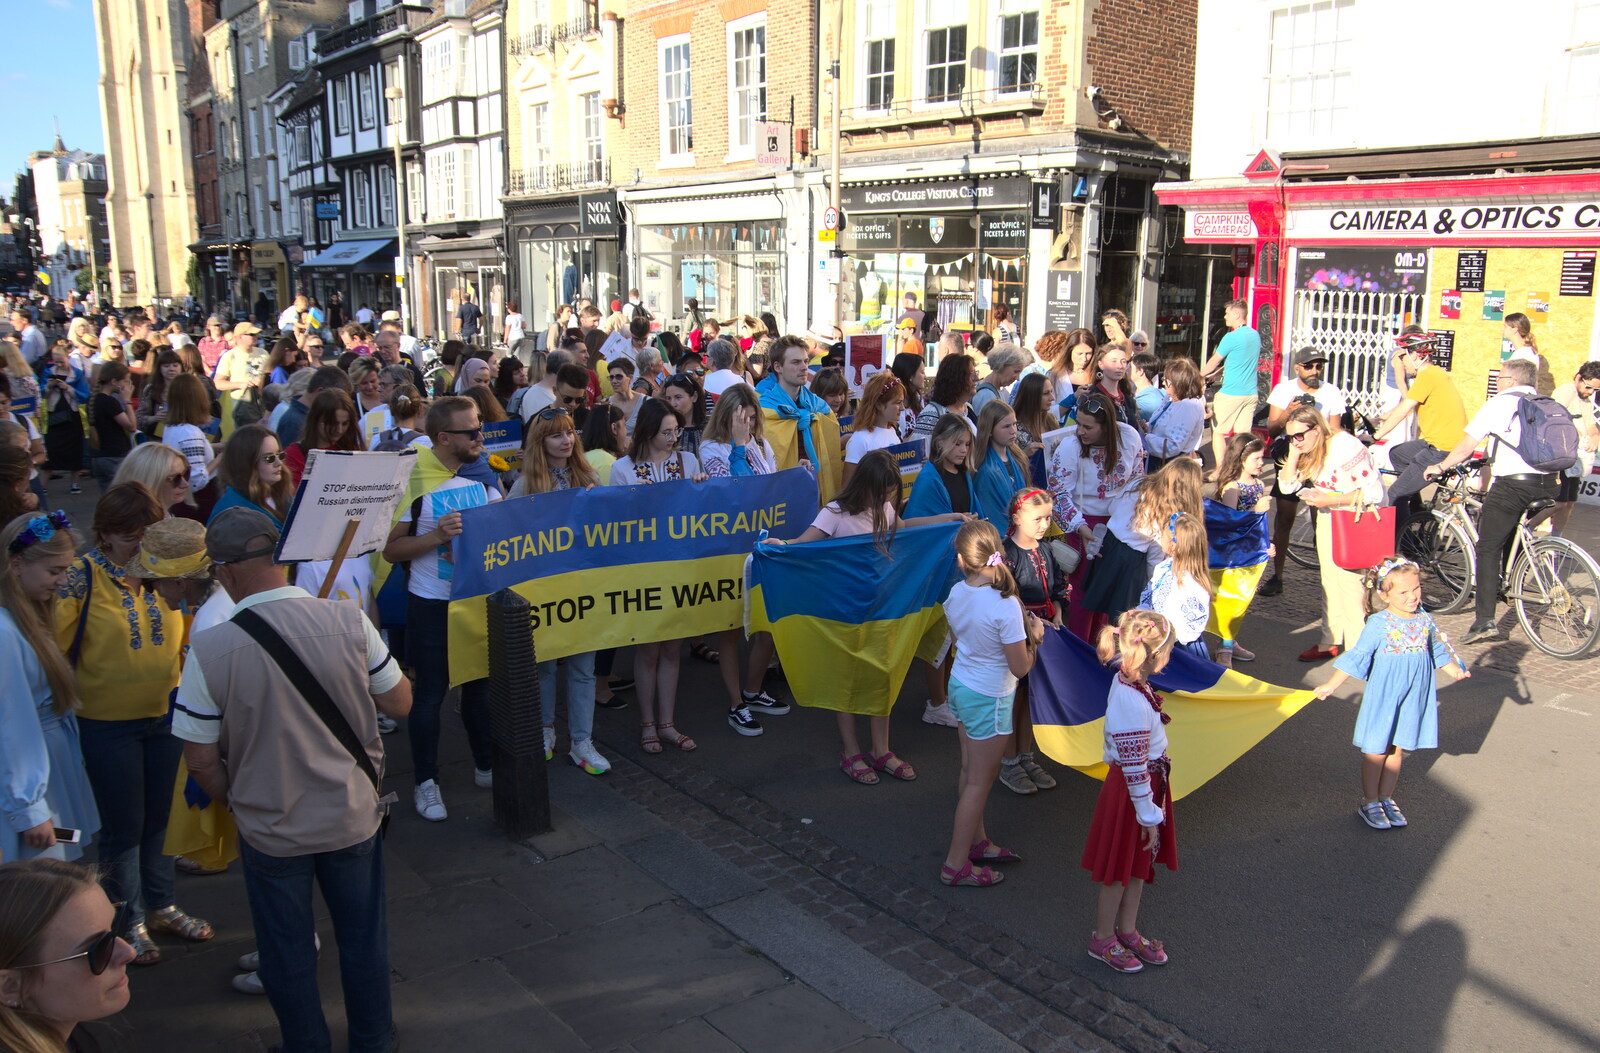 The demo mills around on King's Parade from Anglesey Abbey and a #StandWithUkraine Demo, Cambridge - 24th August 2022